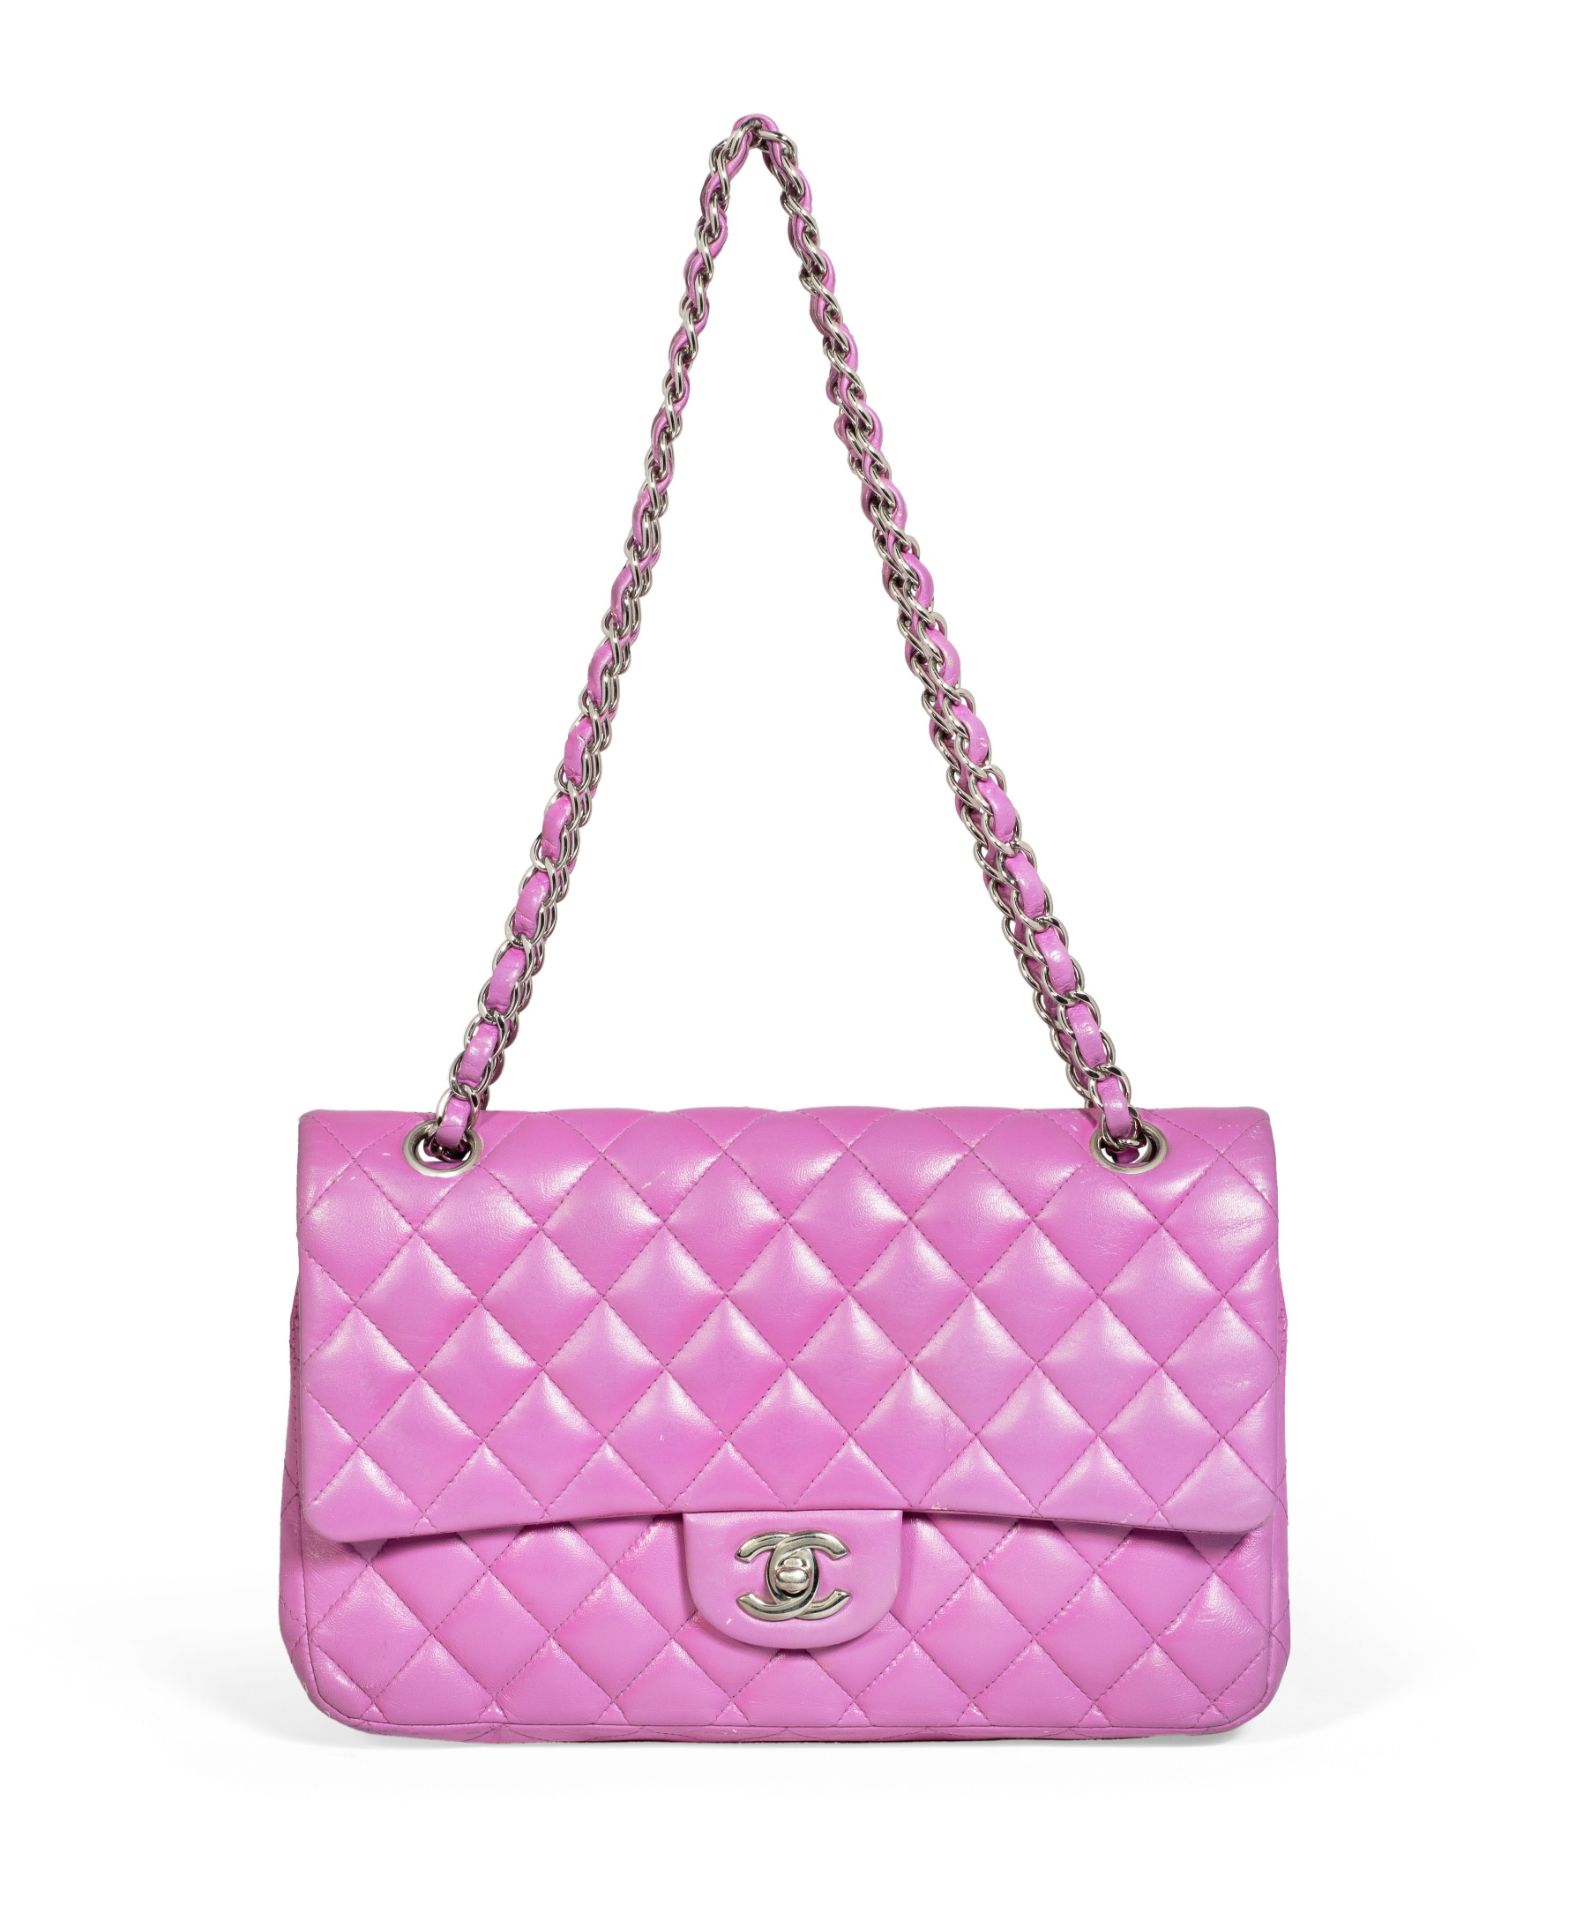 Hot Pink Classic Double Flap Bag, Chanel, c. 2010-11, (Includes serial sticker )